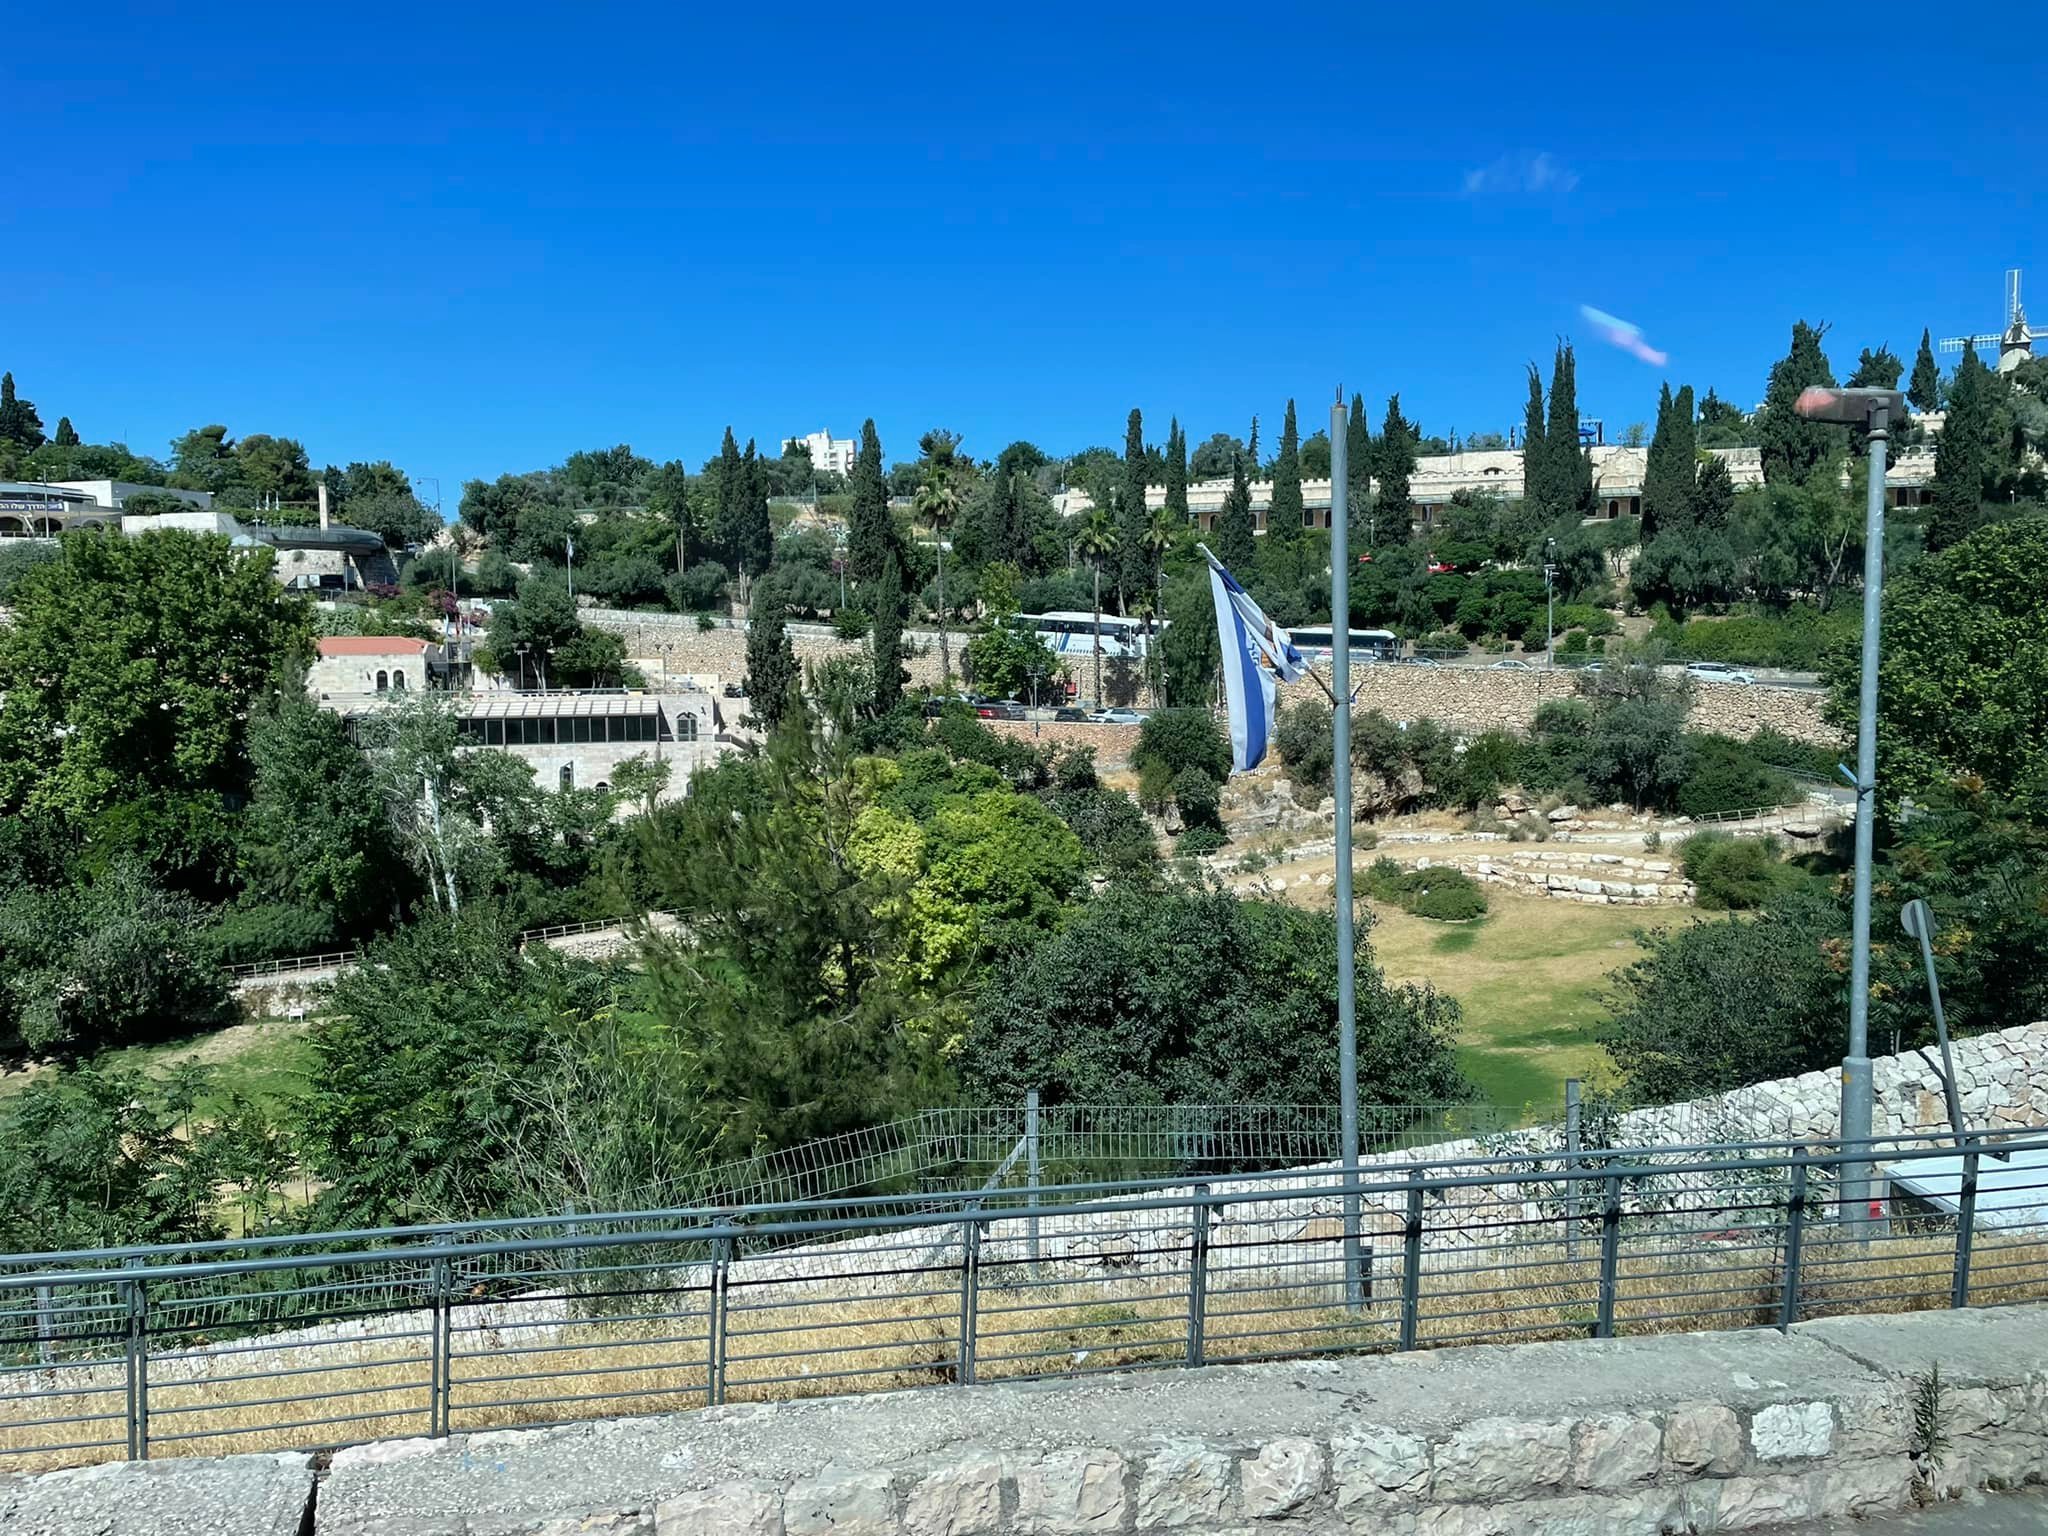  This ravine was once called Gahanna, it’s where the ancient people of Jerusalem dumped their garbage and set fire to it. Jesus used it repeatedly as a metaphor for hell, as did many references in the Old Testament. It has been re-settled and is quit